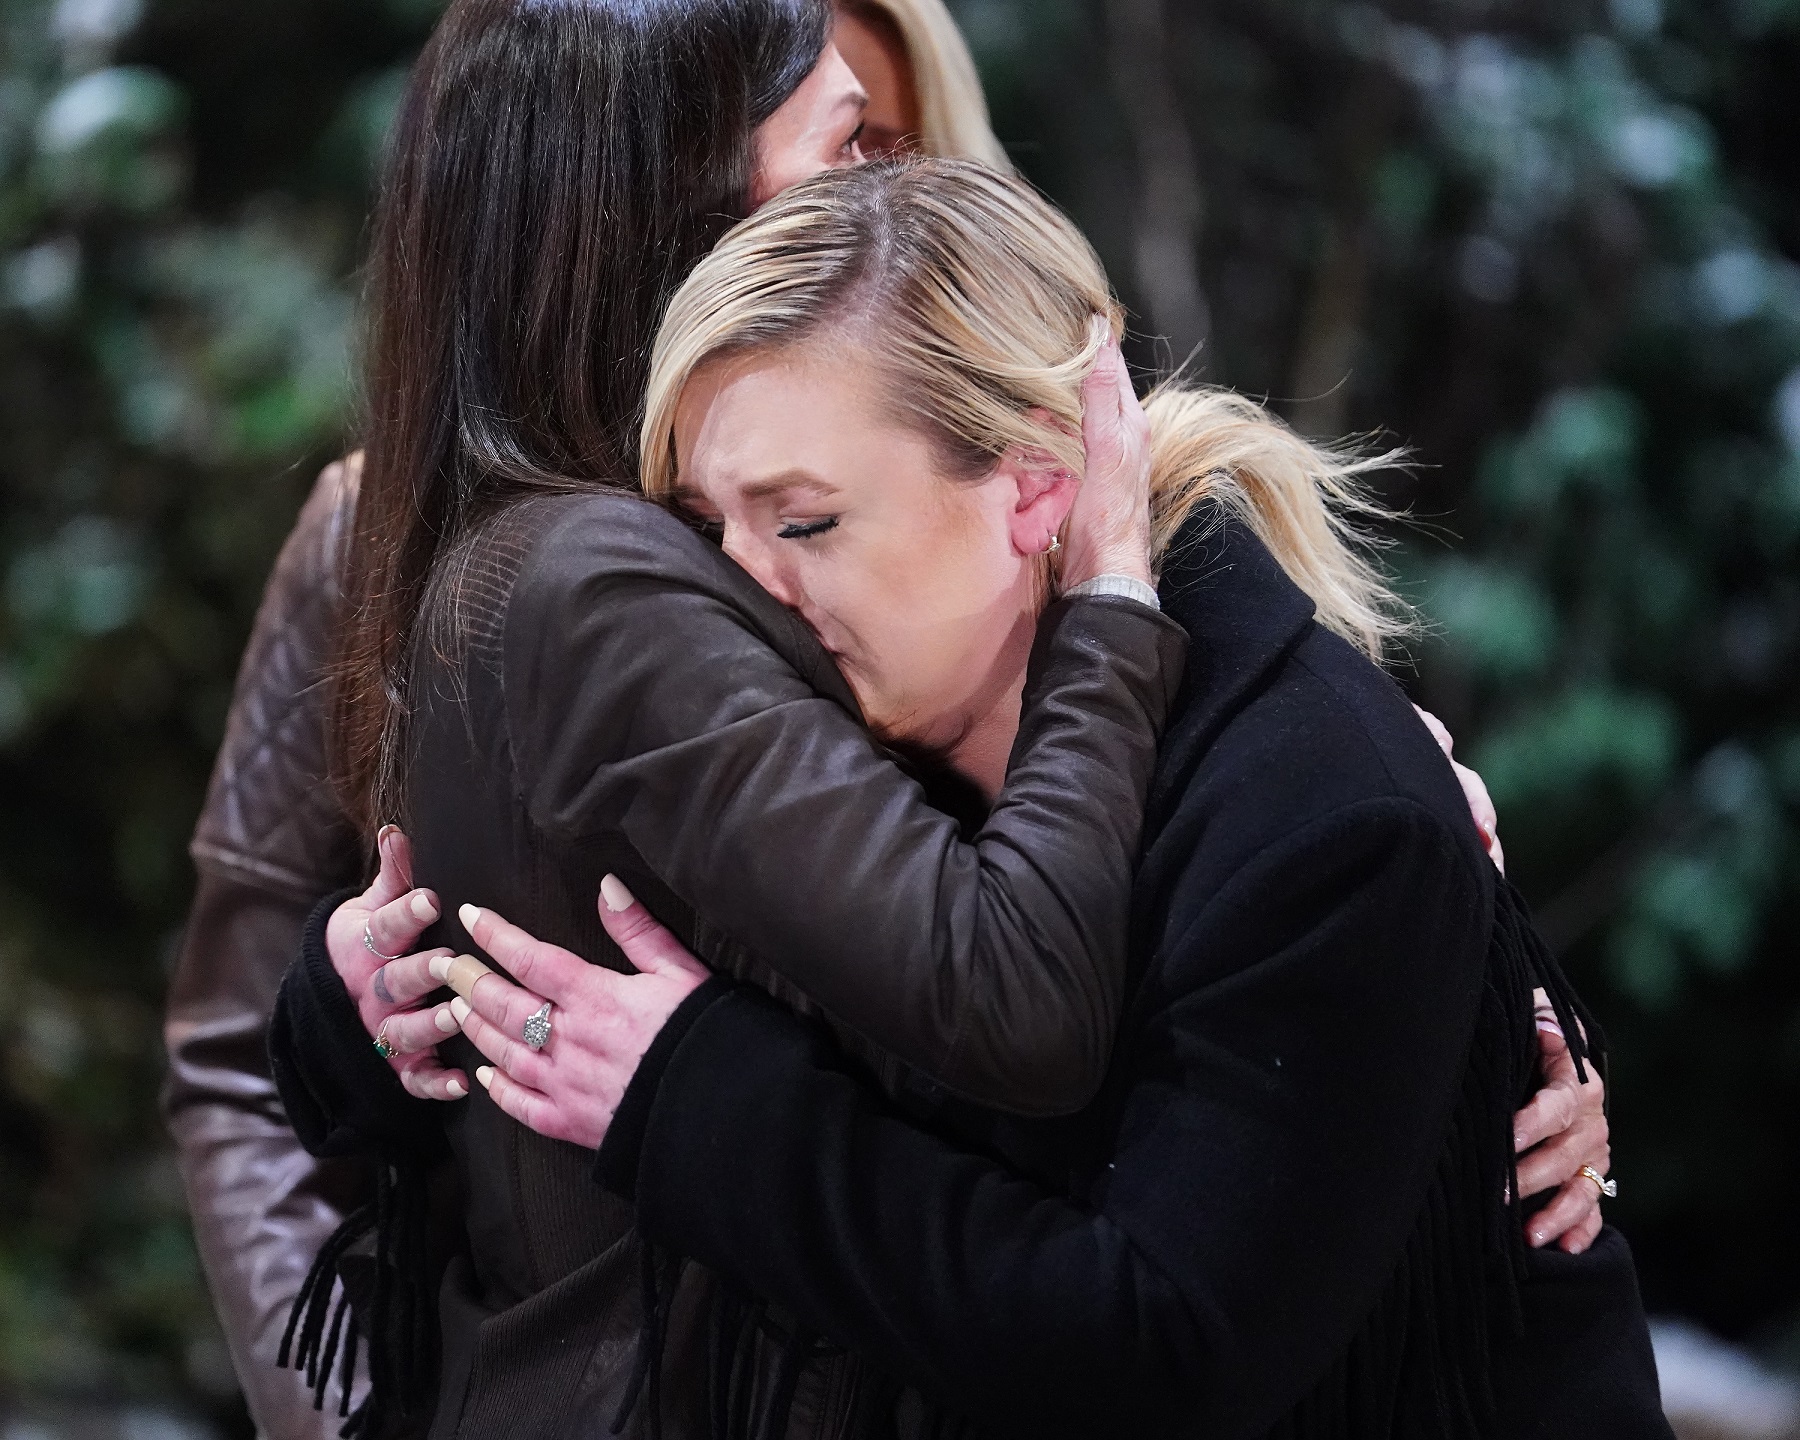 In a scene from 'General Hospital,' Maxie cries into Anna's shoulder, while wearing all-black.